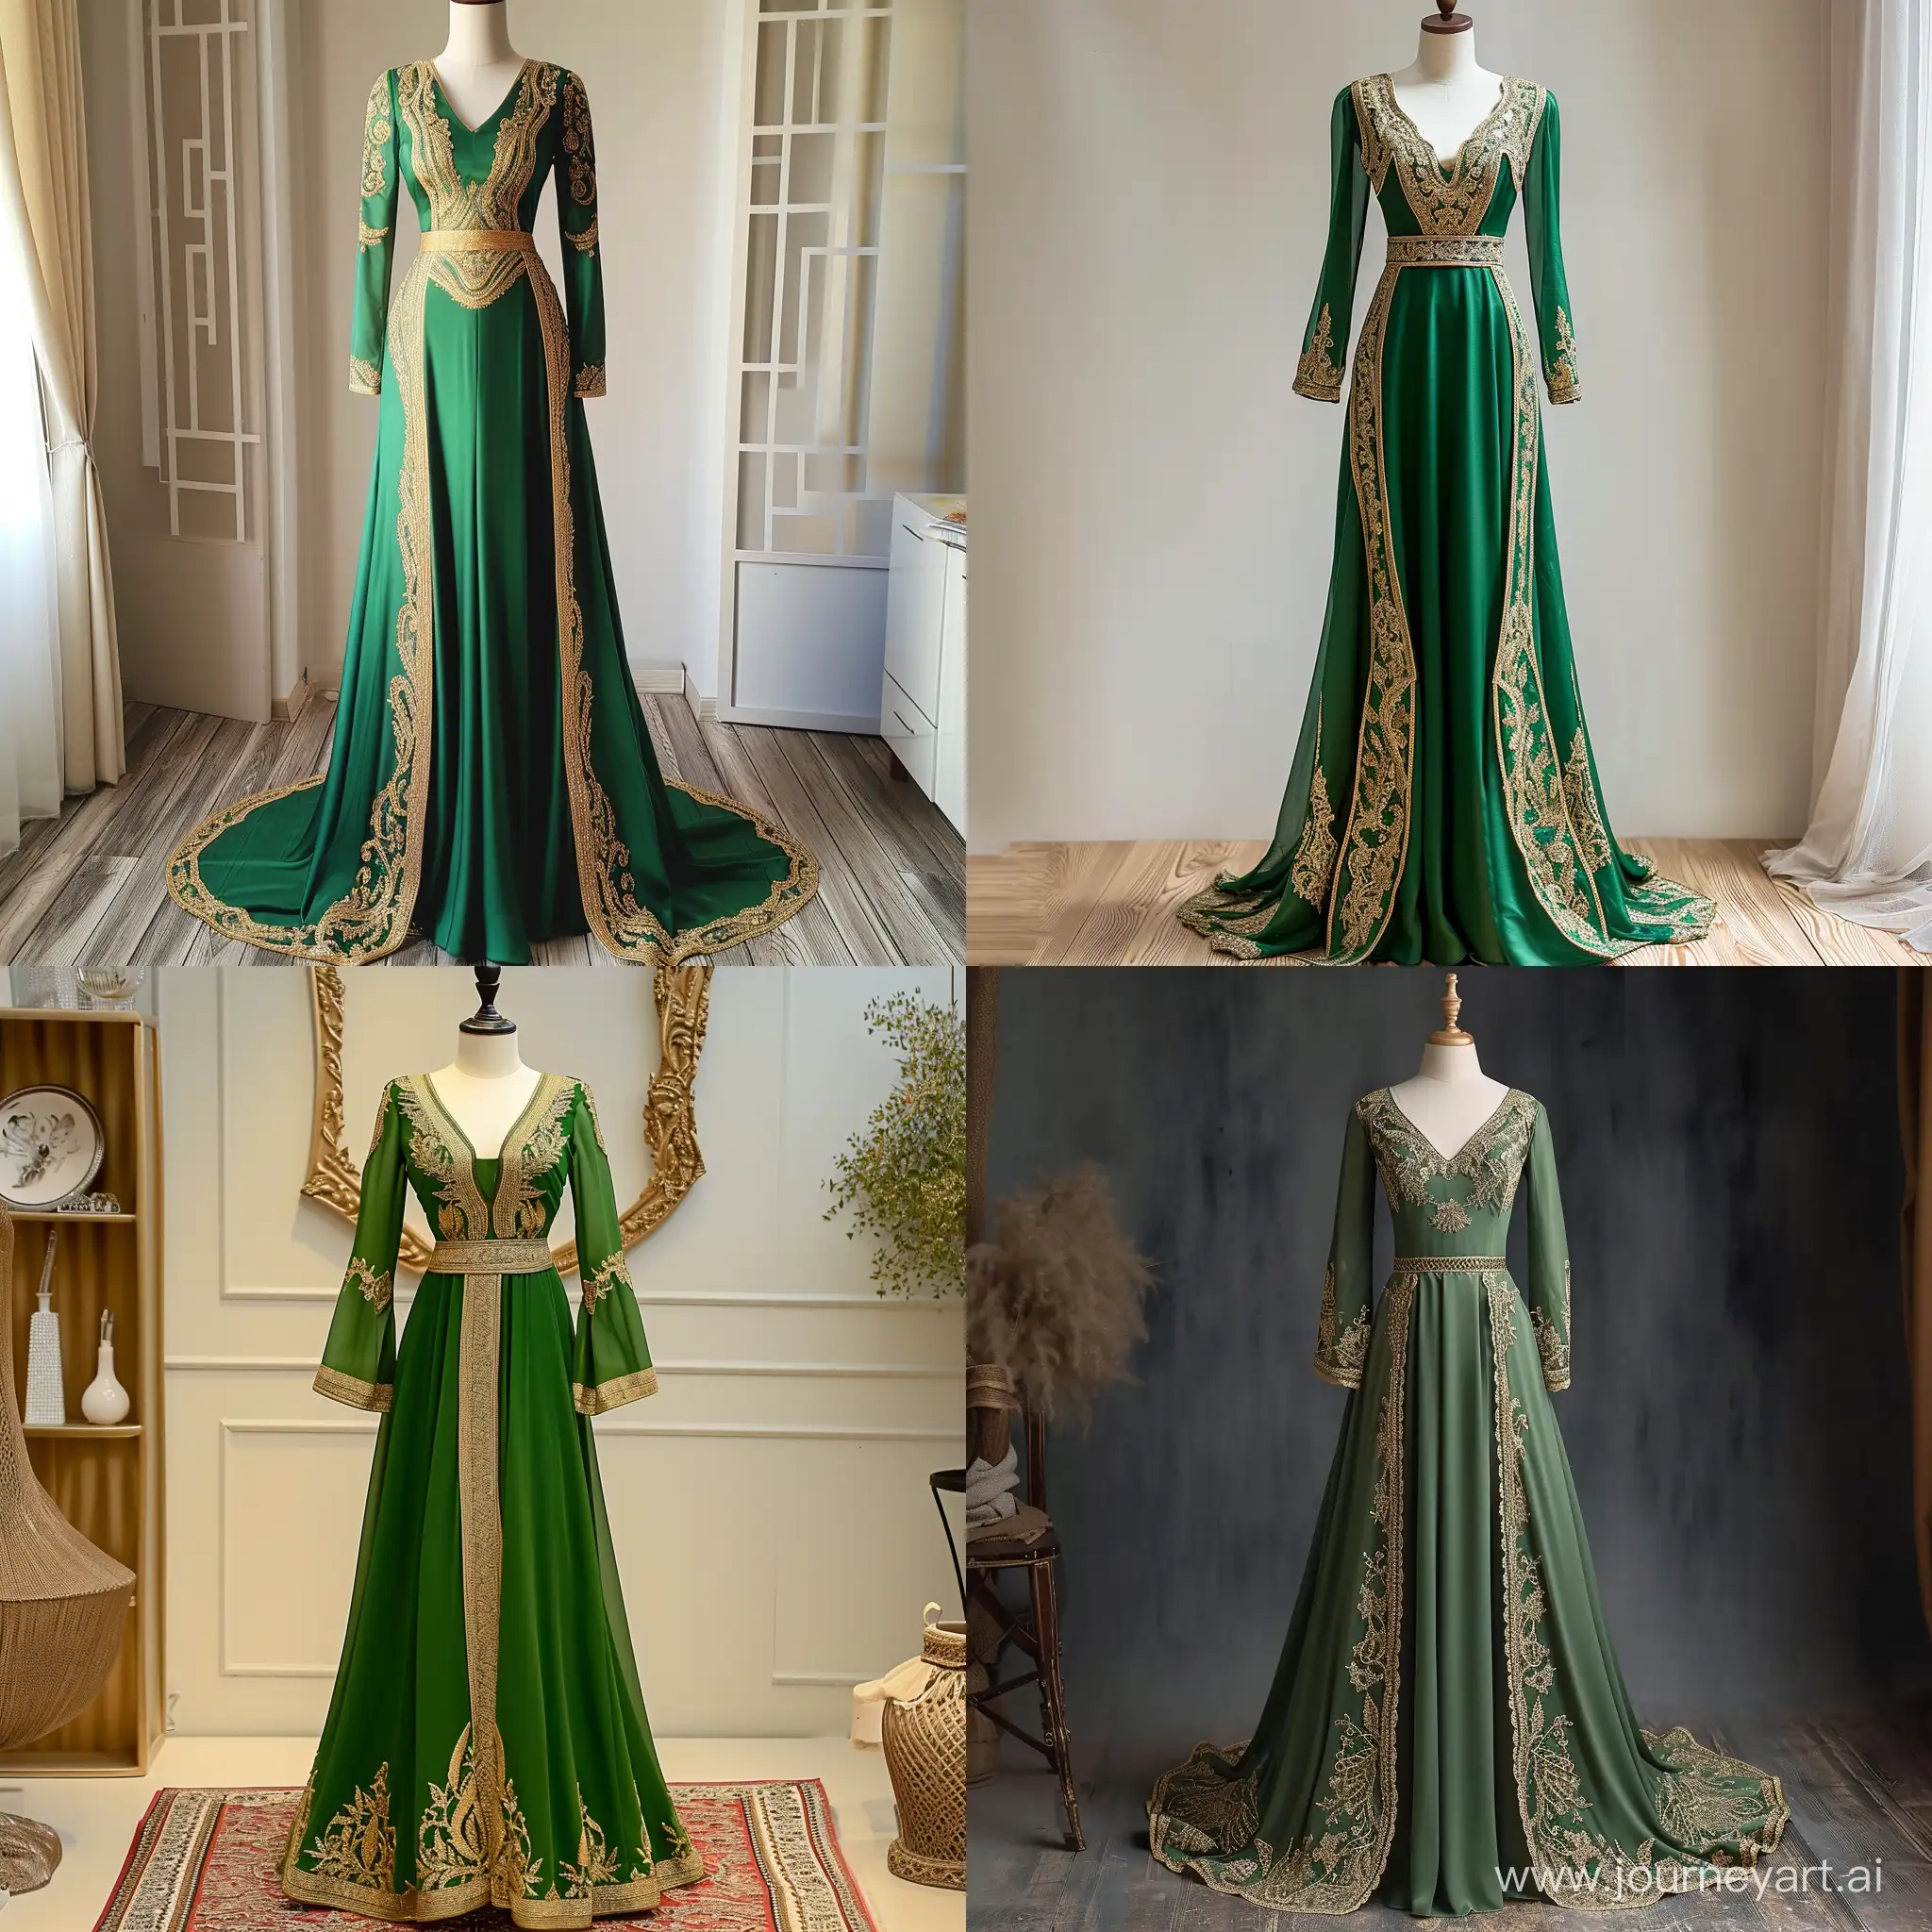 a beautiful green dress with intricate golden embroidery, displayed on a mannequin. The dress is long and flows down gracefully, giving it an elegant appearance. The golden embroidery is intricate and detailed, adorning the borders, waistline, and extending down the length of the dress. The dress has a V-neck design which is also outlined by the golden embroidery. It appears to be made of a glossy material that gives it a luxurious look. The waistline is accentuated by an embroidered belt-like design that adds to its elegance